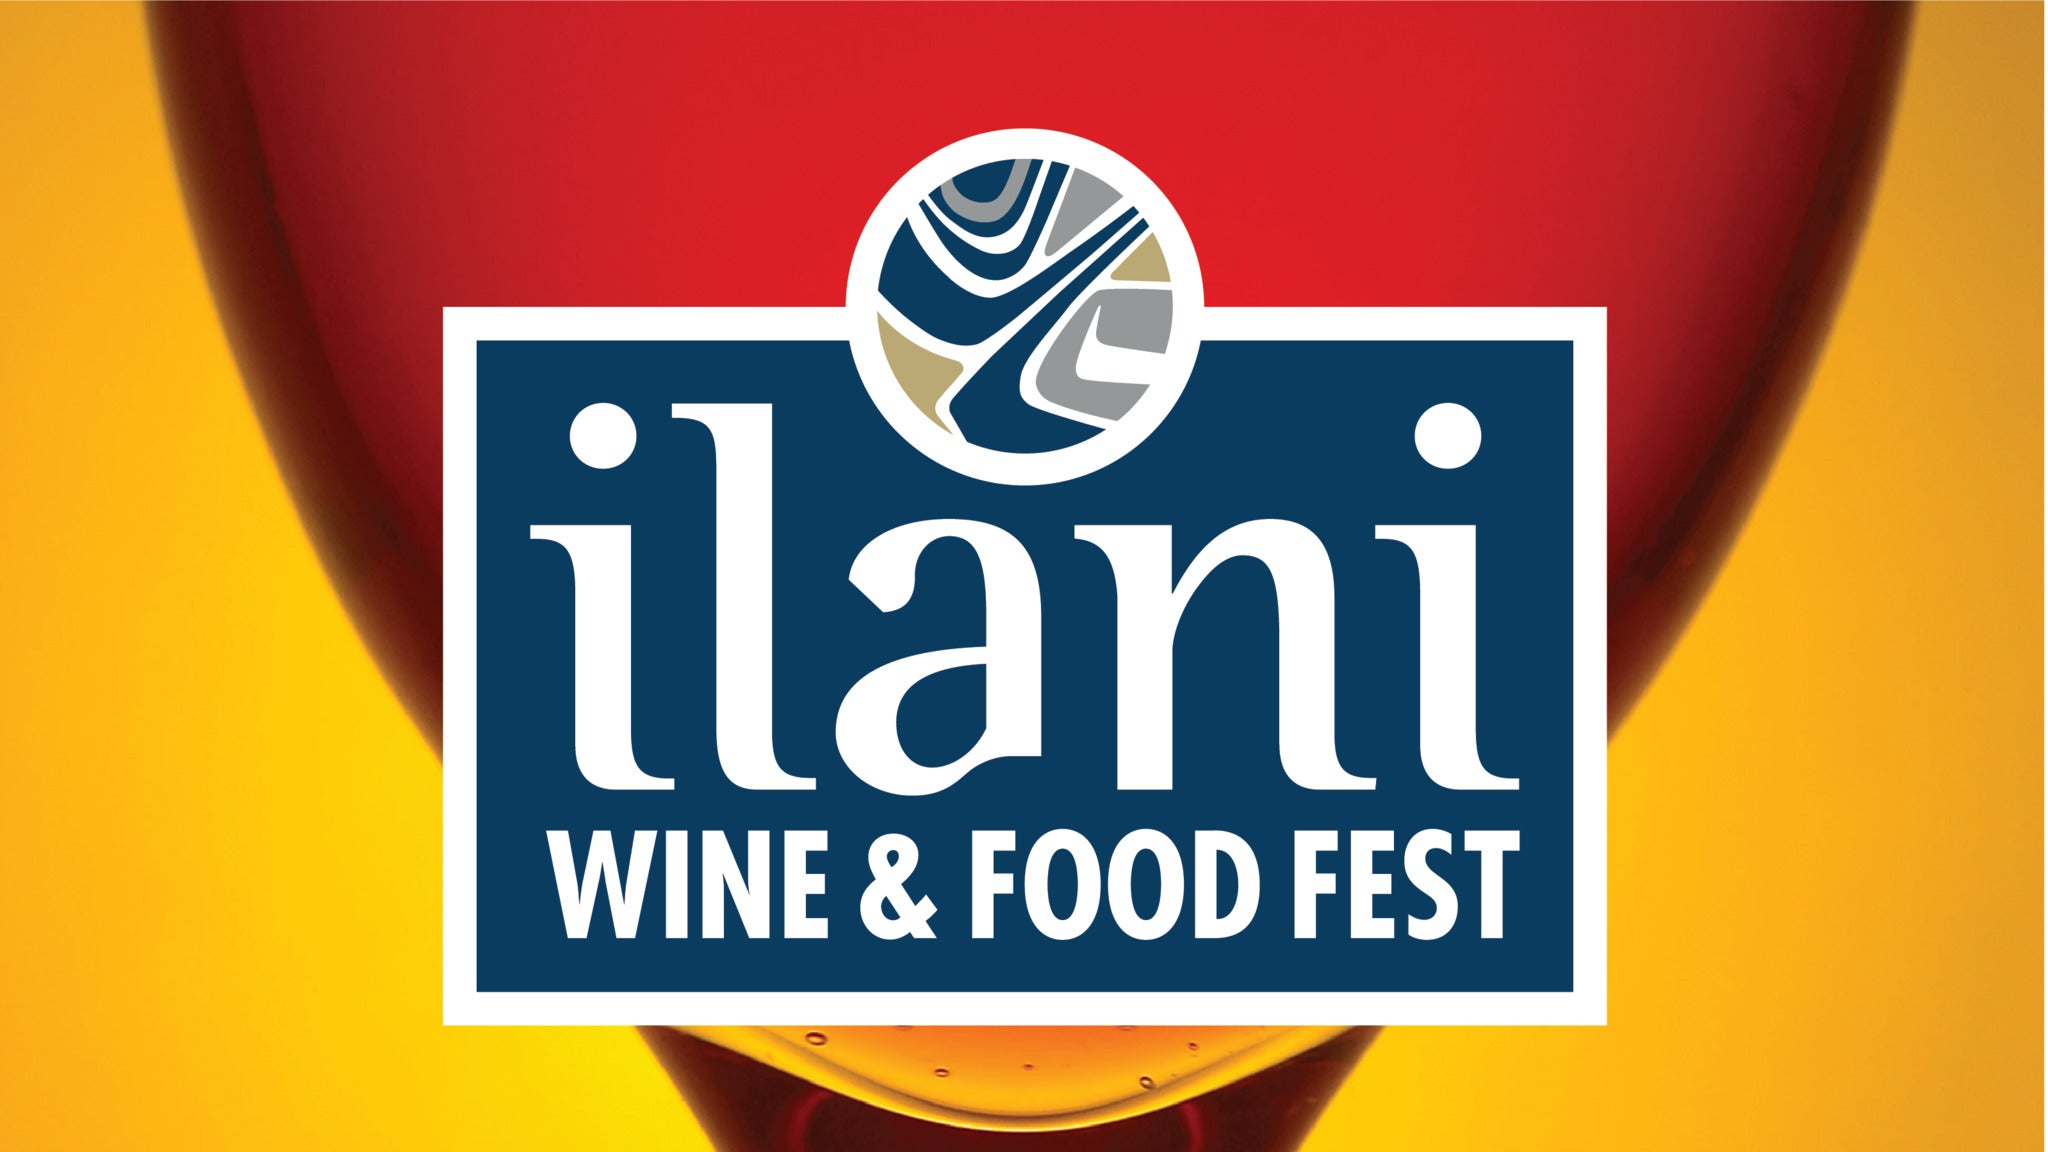 ilani Wine & Food Fest - 7pm Session Friday Grand Tasting in Ridgefield promo photo for Early Bird presale offer code